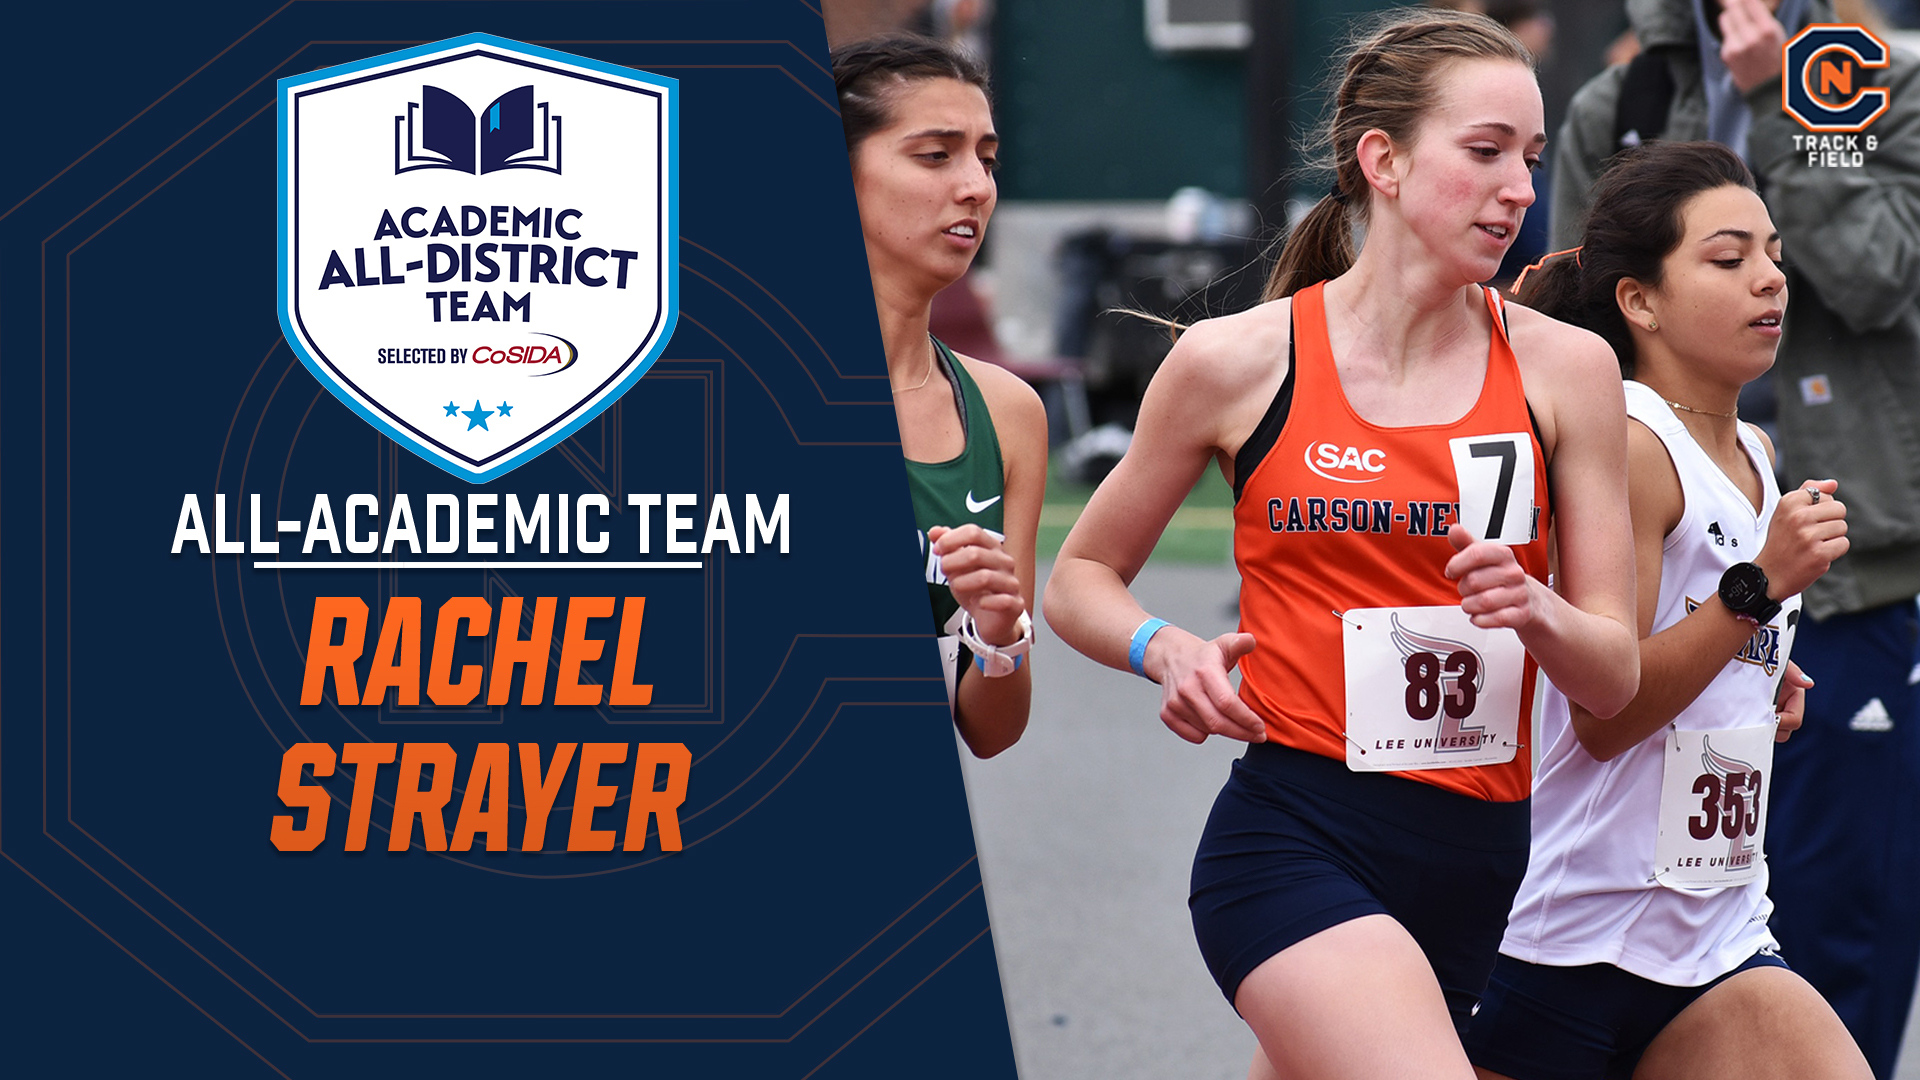 Six women's track & field/cross country athletes named to CoSIDA Academic All-District Team